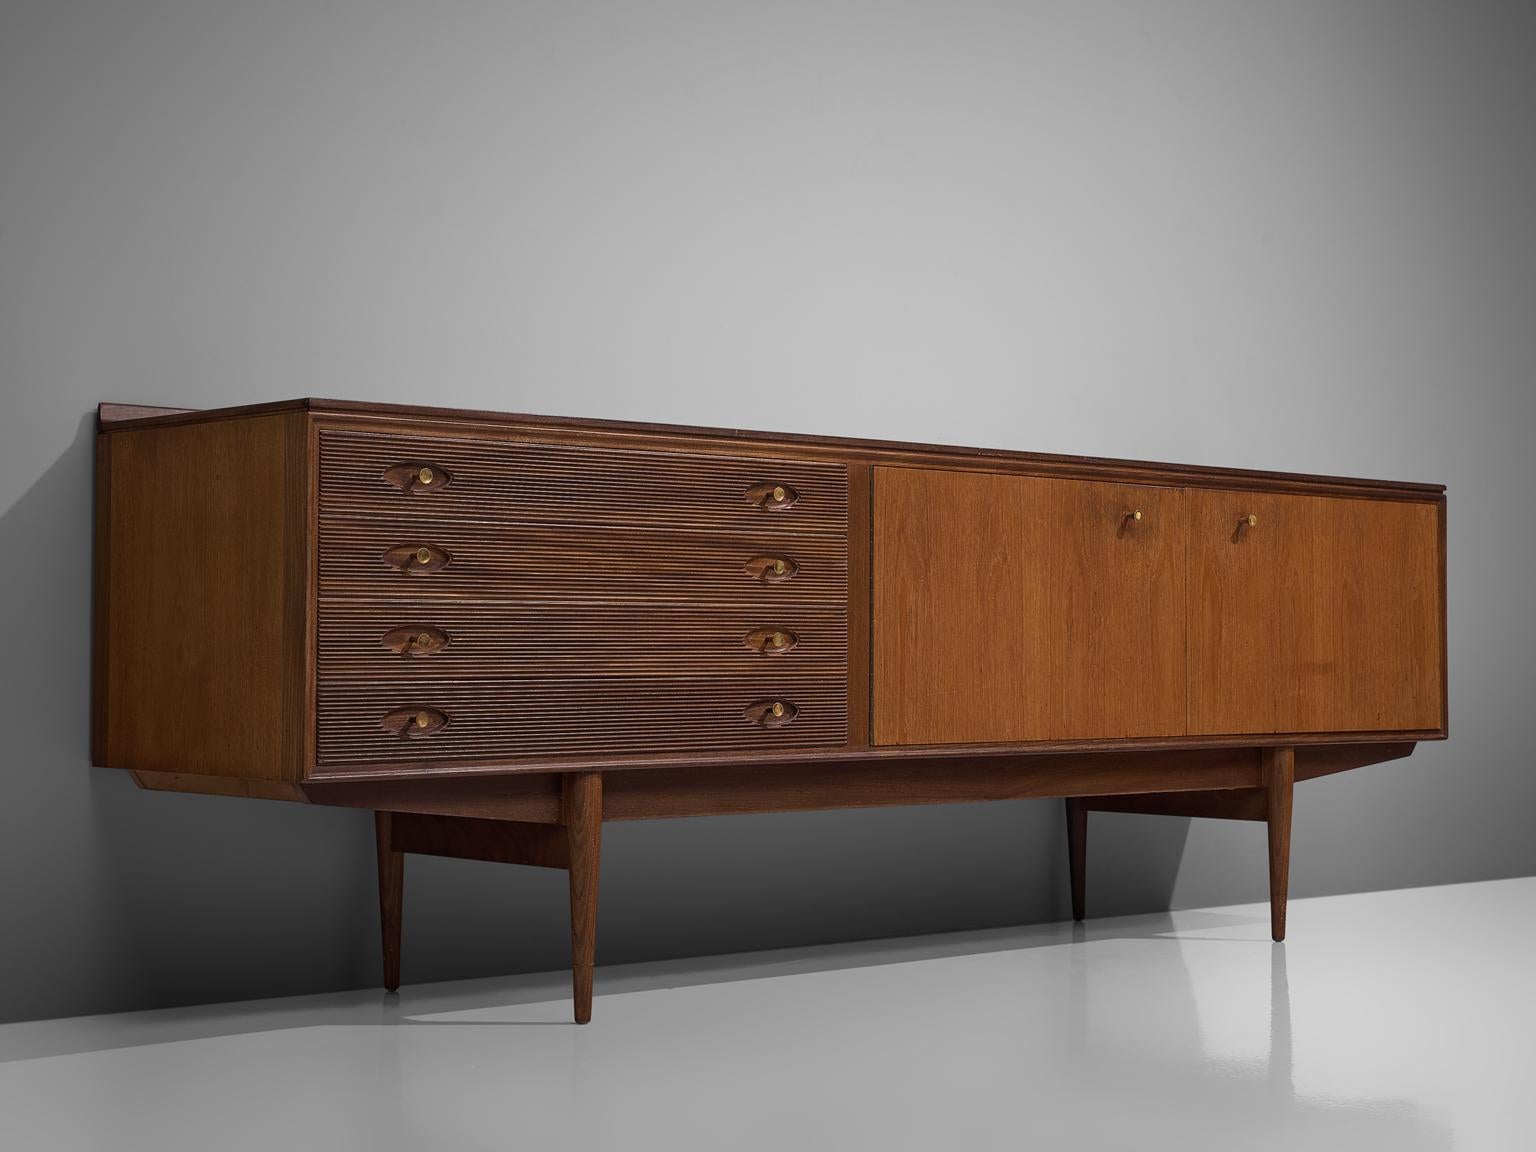 Robert Heritage for Archie Shine, sideboard, walnut, United Kingdom, 1960s 

This sideboard is equipped with a drawer section with 4 drawers and a large storage unit. The drawers are detailed with ridged fronts and wooden handles based on straight